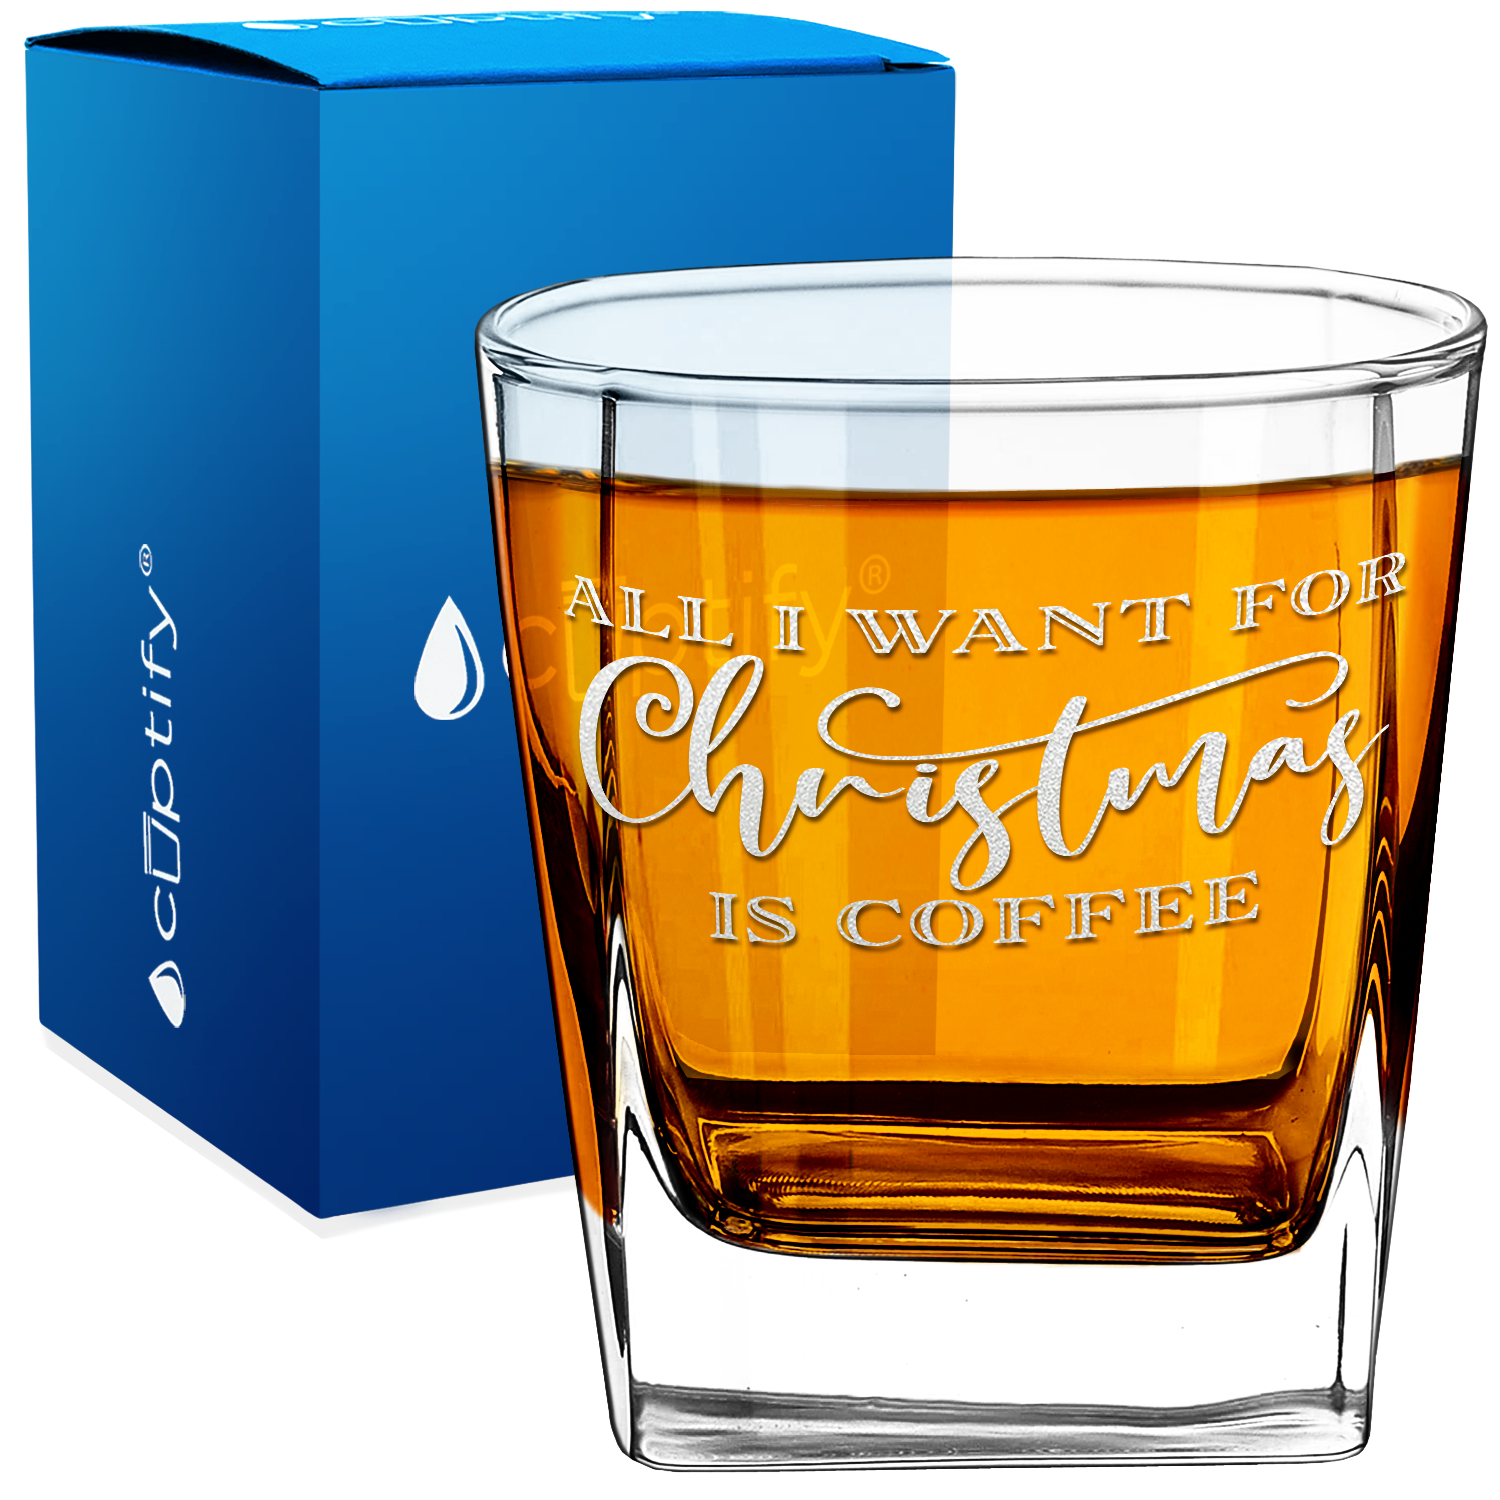 All I want for Christmas is Coffee 12oz Double Old Fashioned Glass